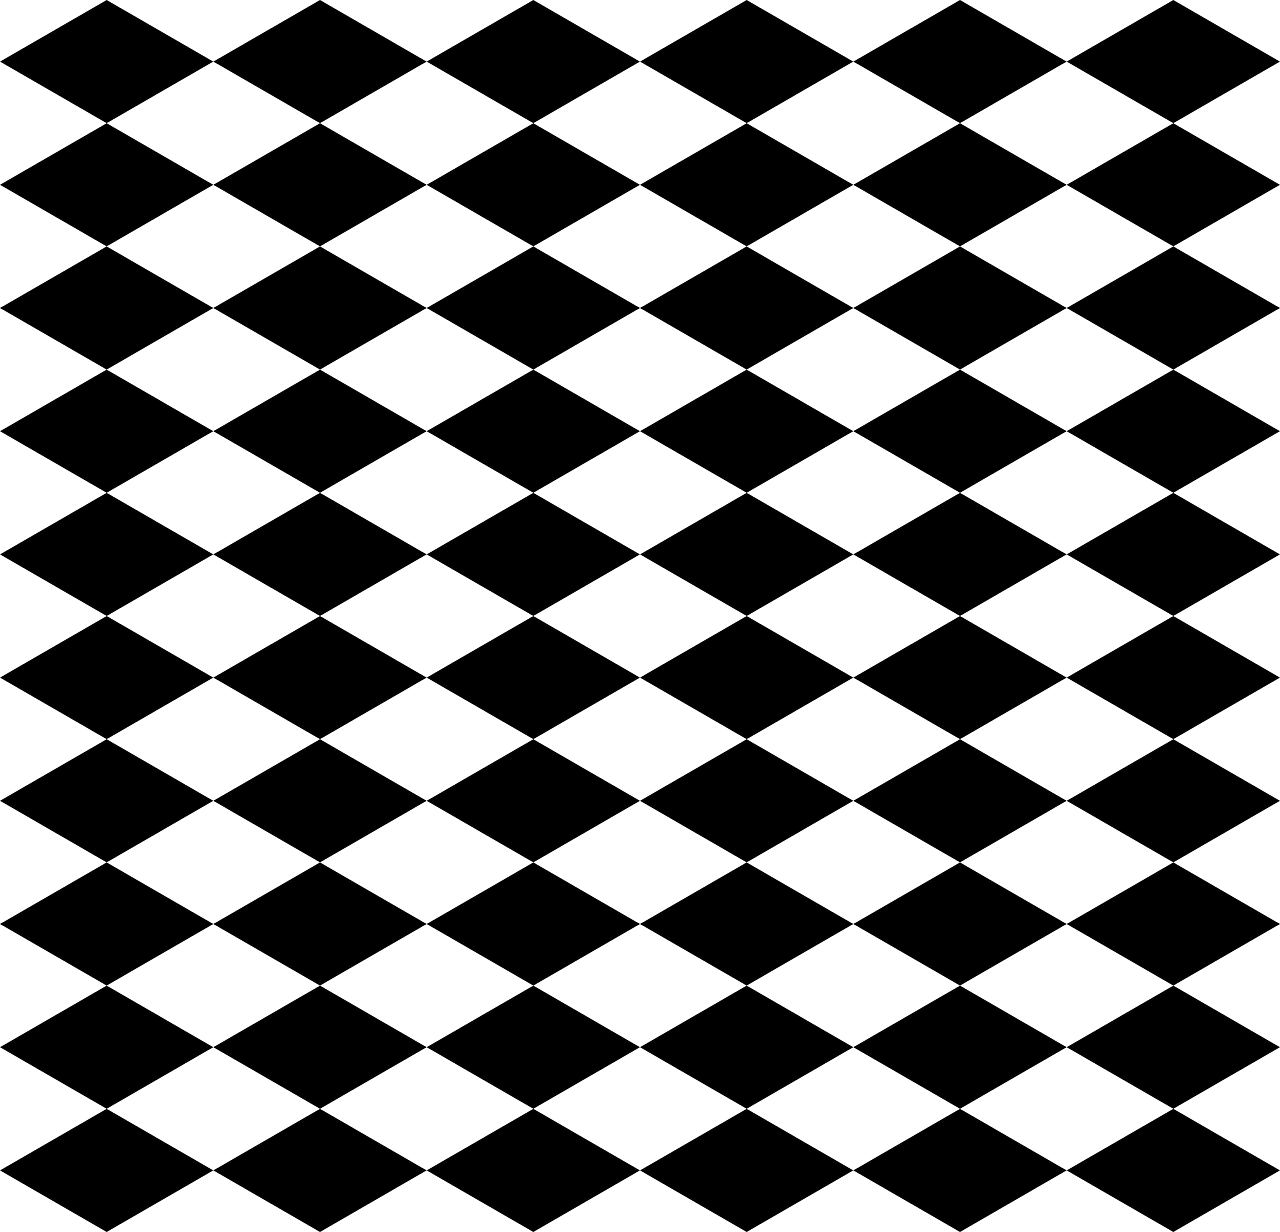 a black and white checkered pattern is shown, inspired by Steve Argyle, hd phone wallpaper, tarot card background, facing sideways, tiles